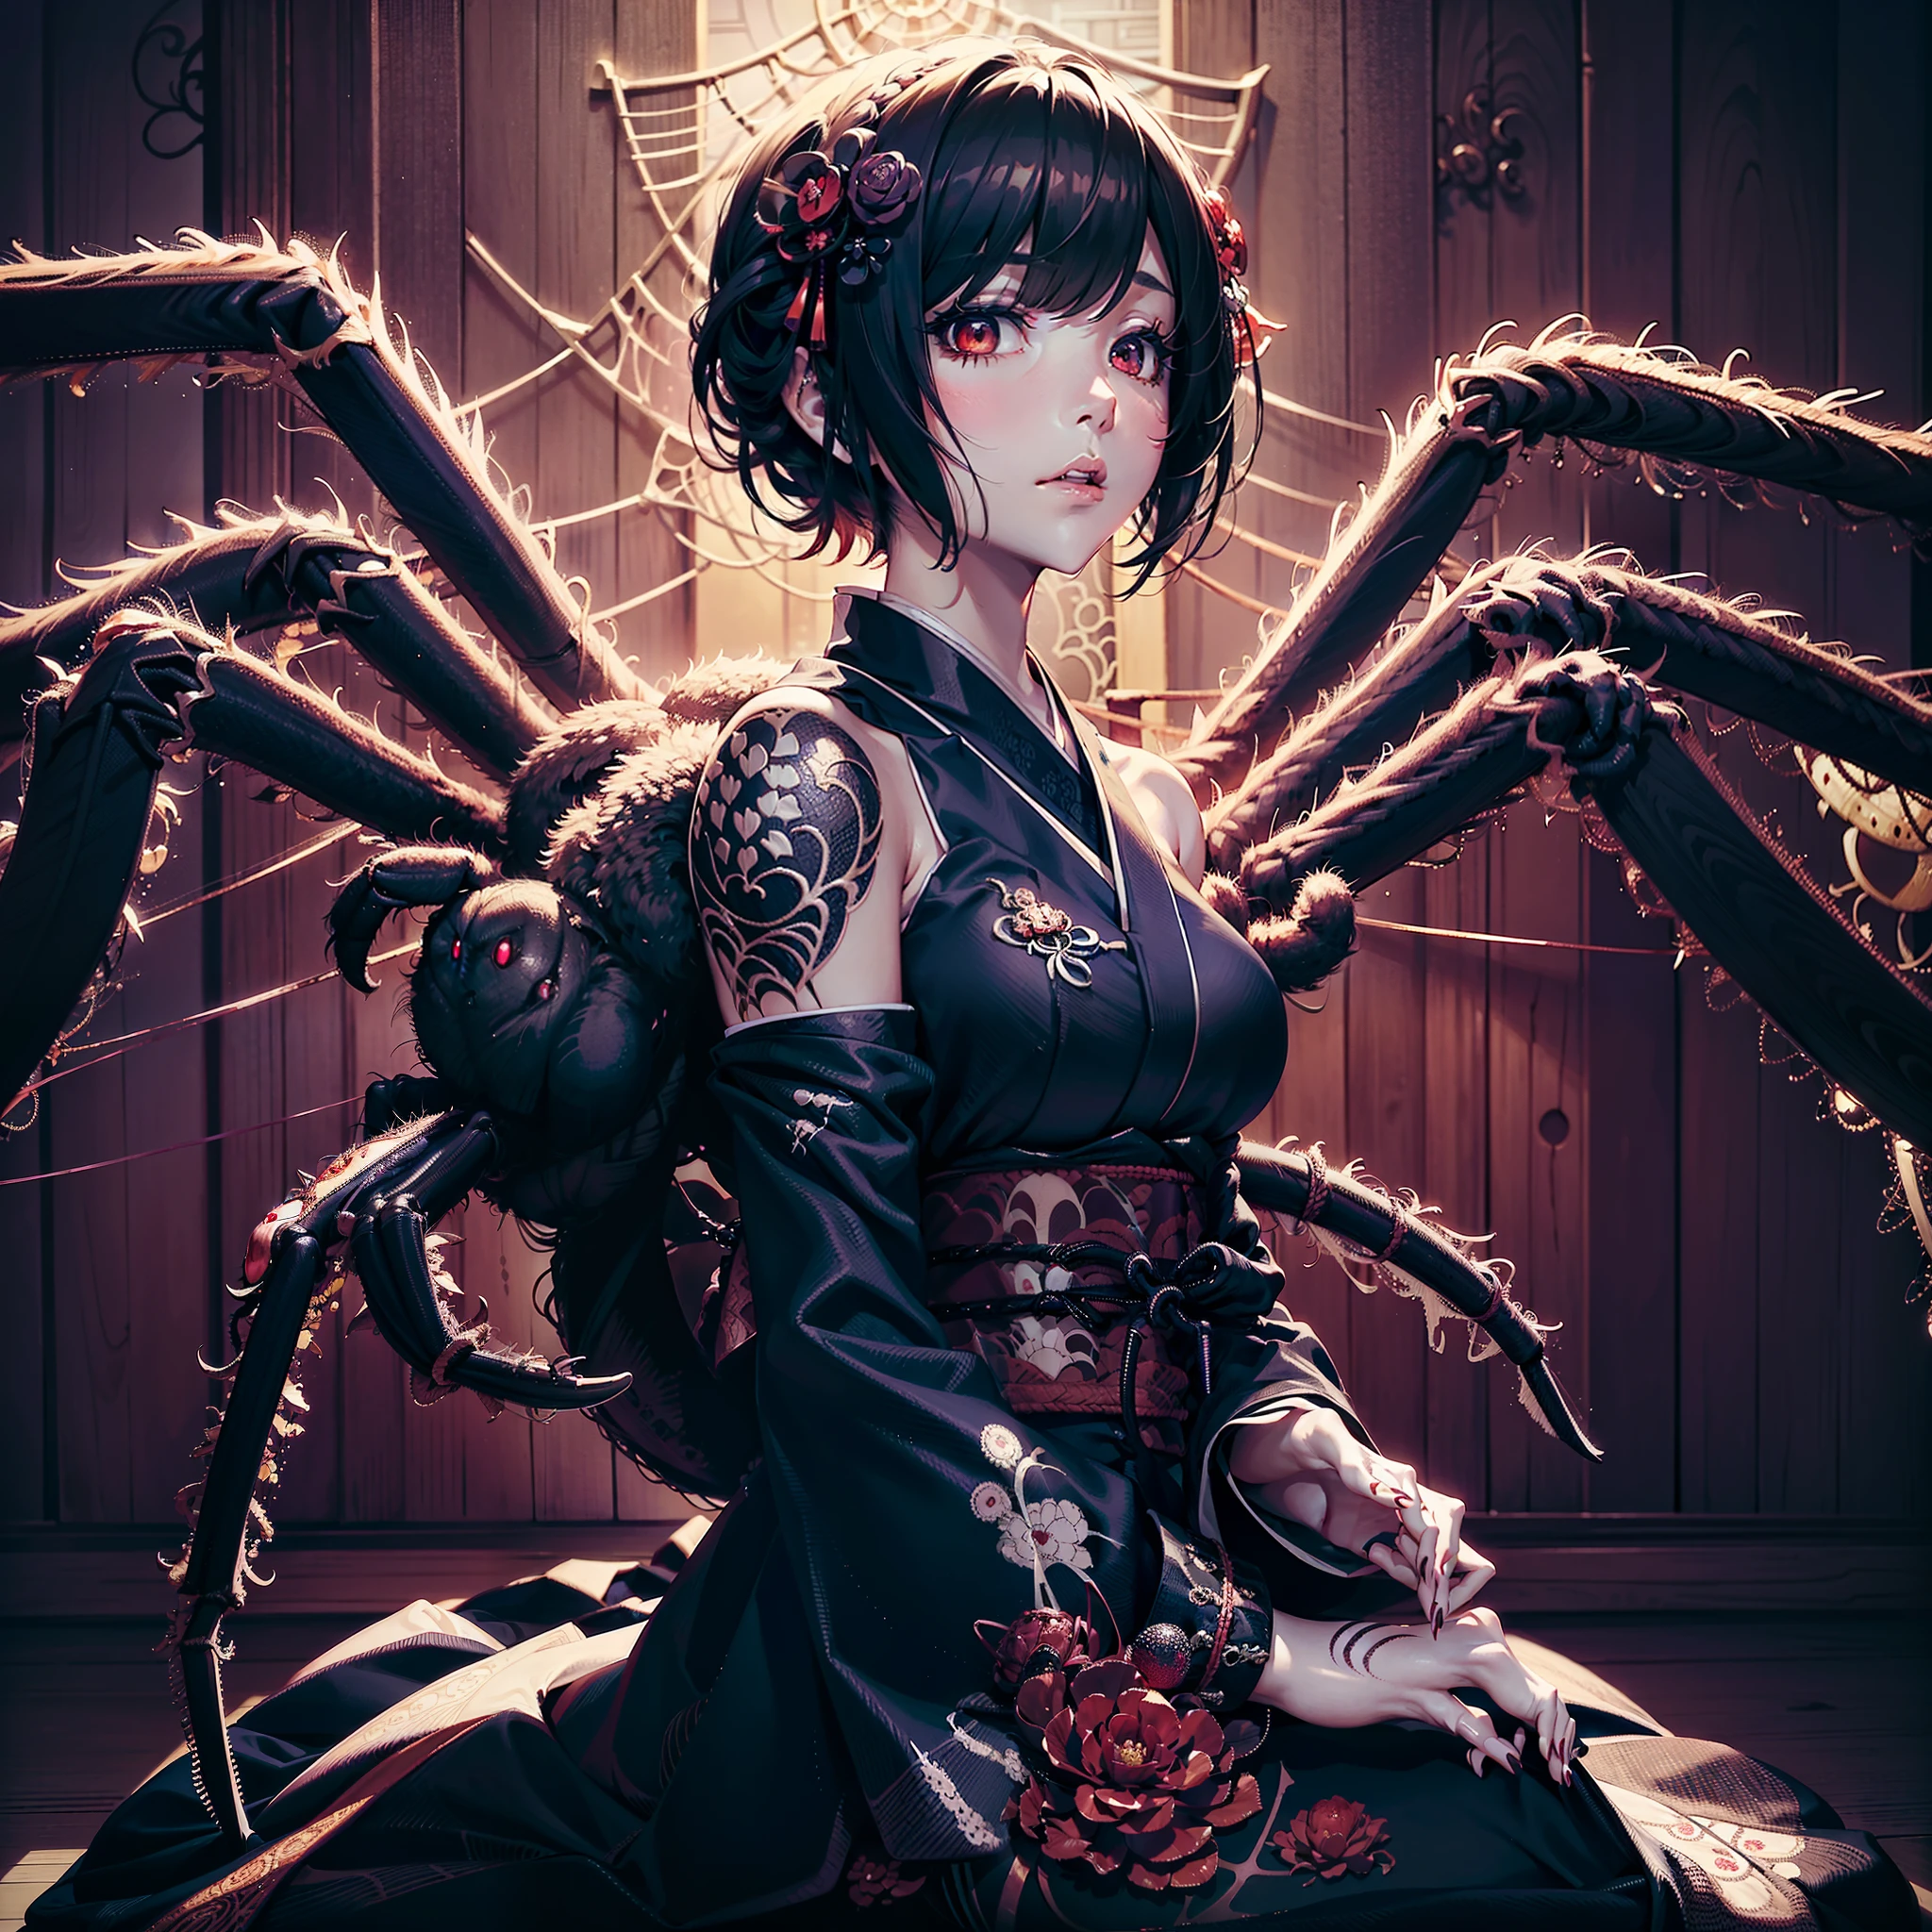 Beautiful girl fused with a spider. Girl in Japanese style gothic dress. ((Female Solo. 1.1)) . hiquality. Dark fantasy style illustration. she has short hair. ratex. Shining eyes. Spider legs extending from behind her. tarantula. Embroidery with a spider web pattern. Spider web tattoo. monstergirl. Dark indoor. Wooden house.